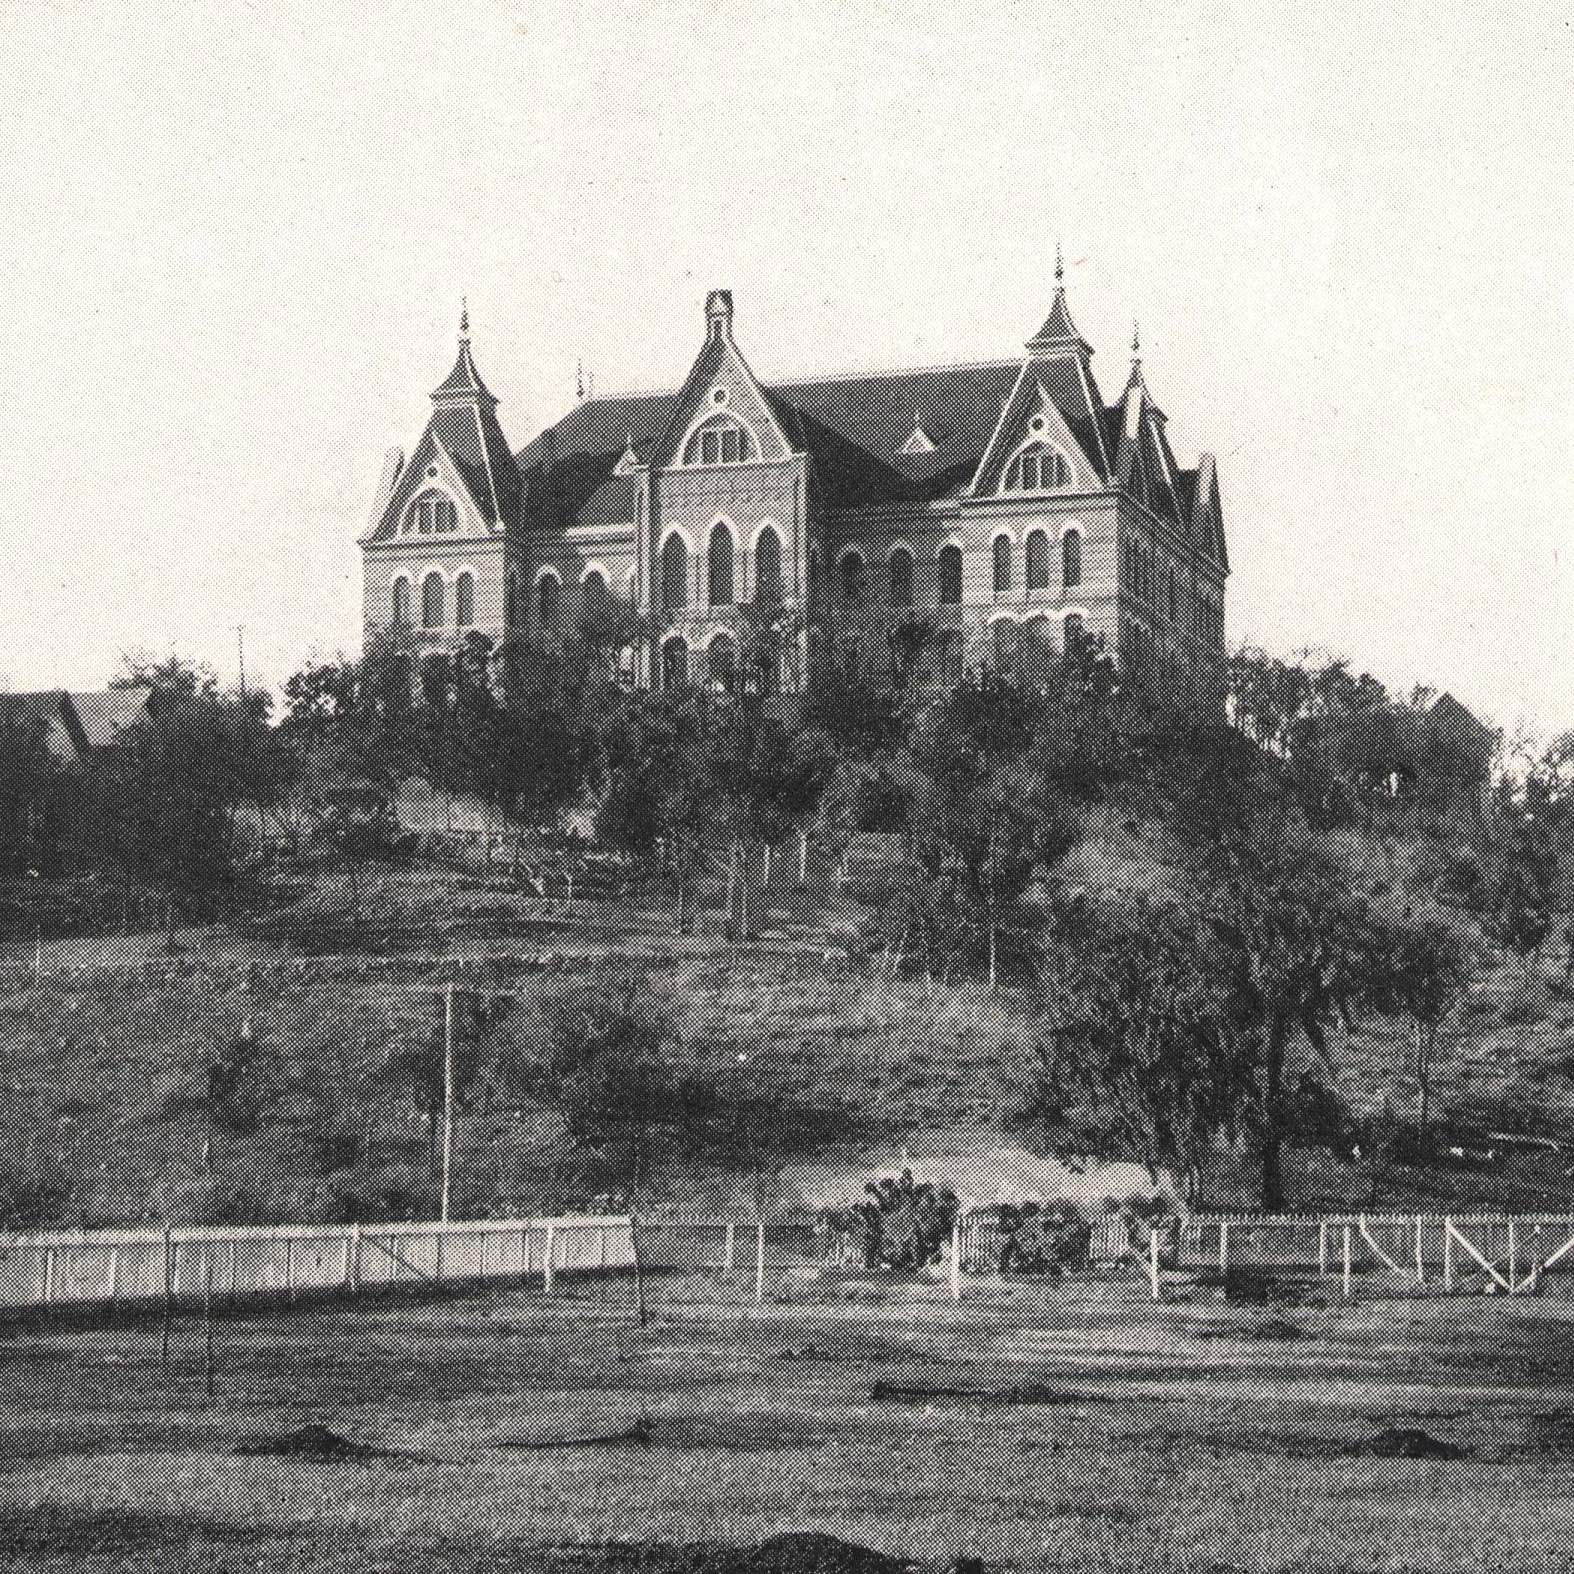 early 1900's image of Old Main at the top of the hill